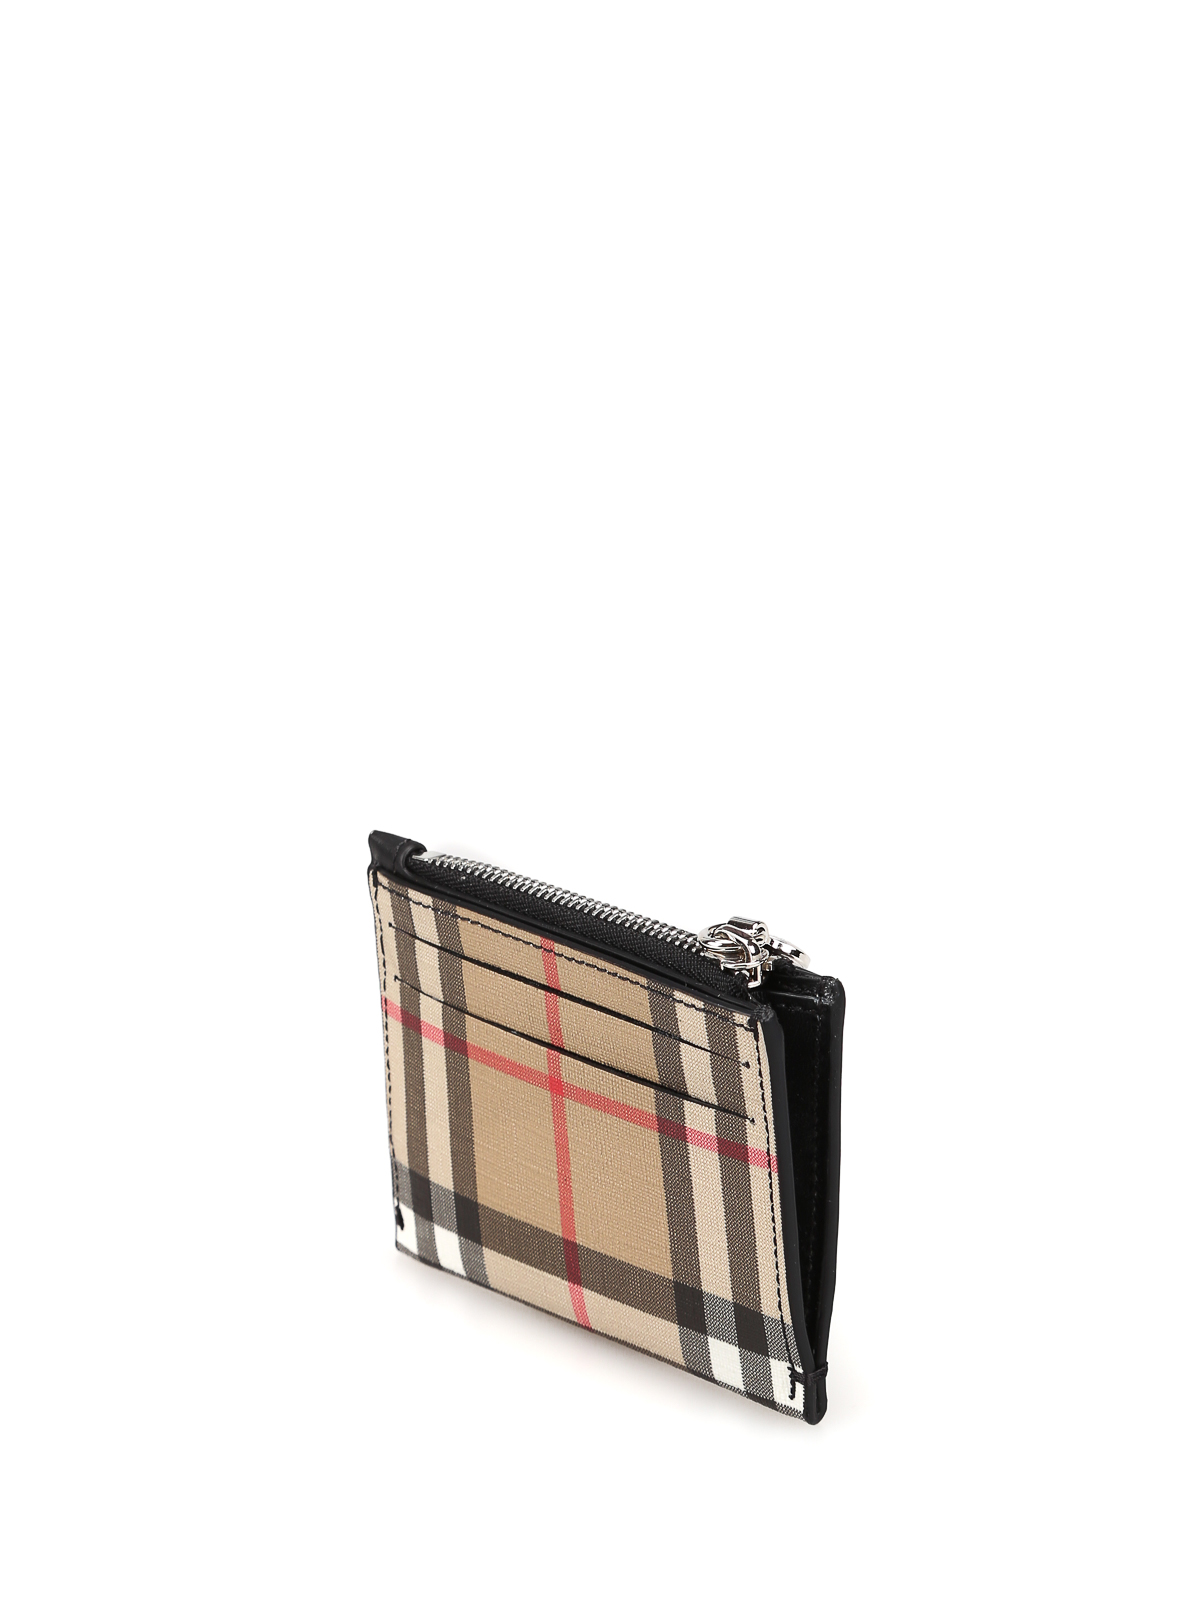 Burberry wallets & card holders for Women